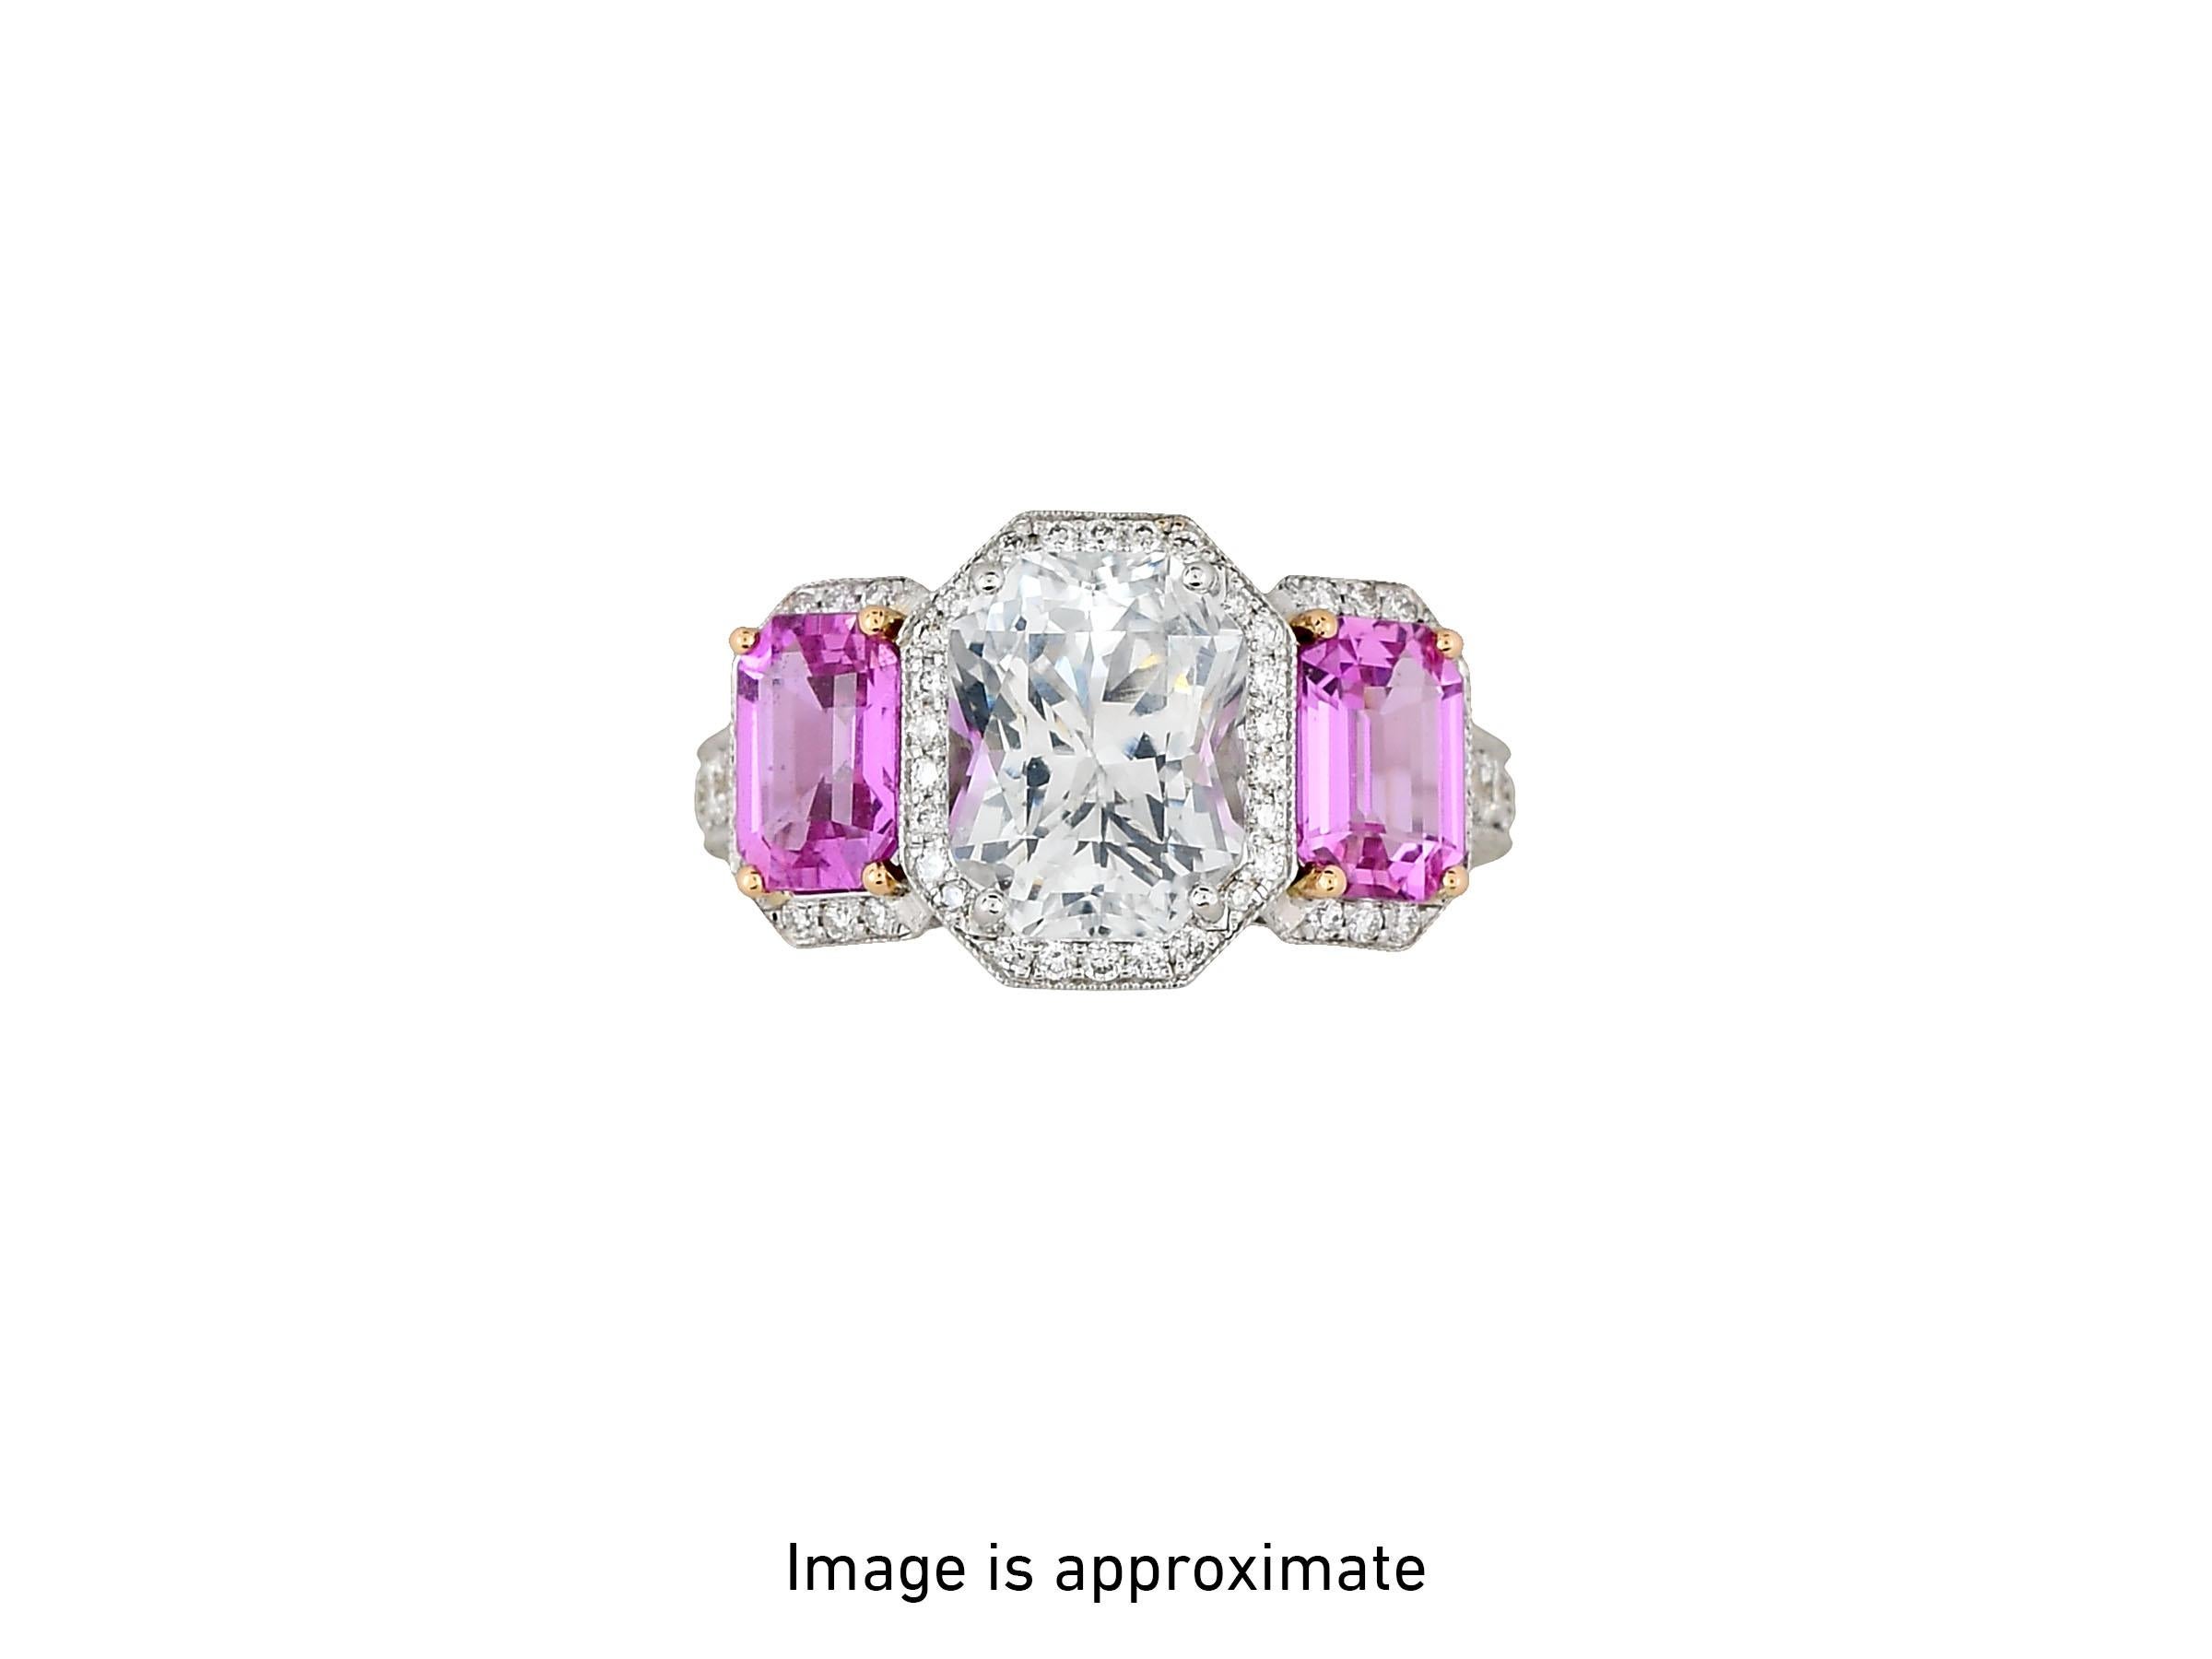 Modern 3.82ct white sapphire with 2.25ct pink sapphires in 18K bridal ring. For Sale